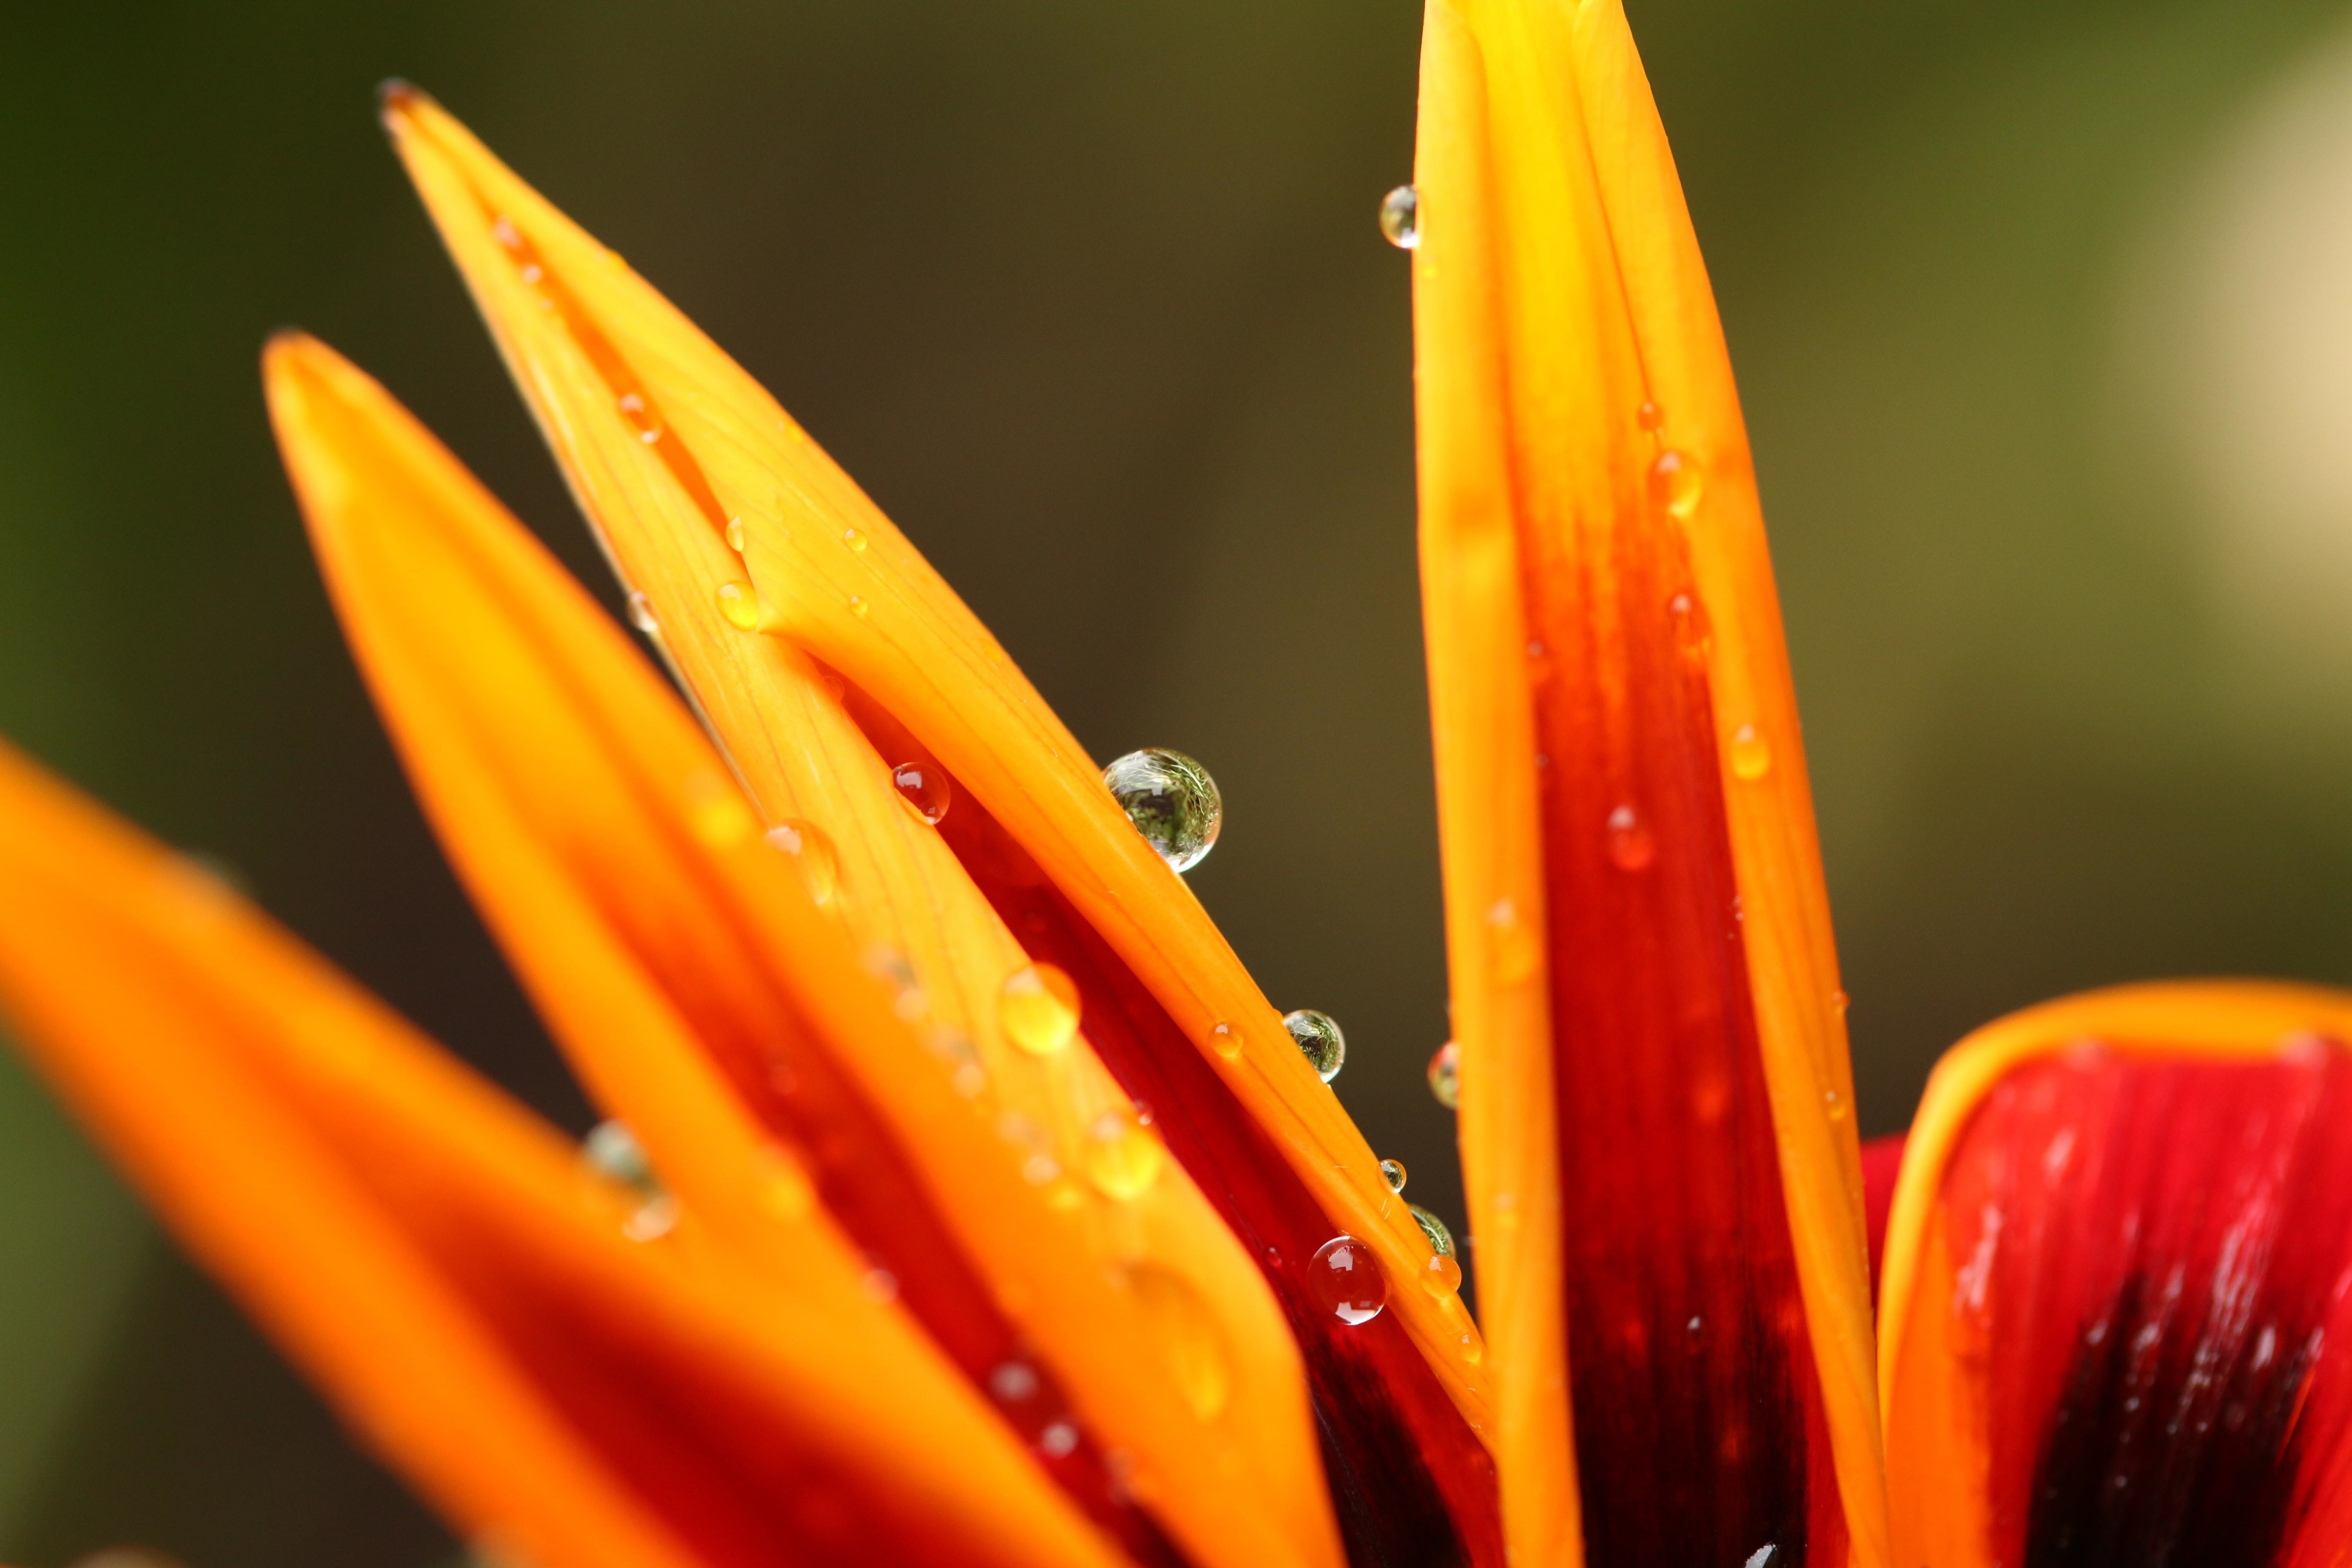 flower bloom and dew drops